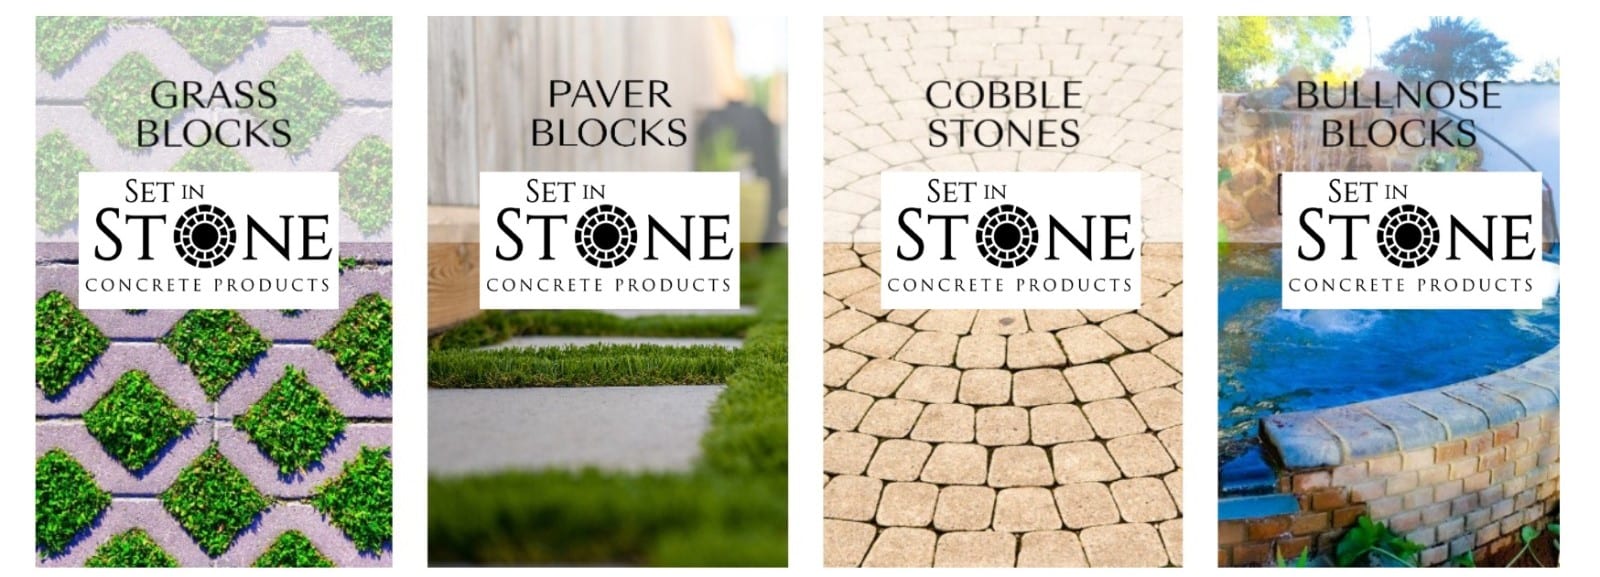 Set in Stone Concrete Products 6